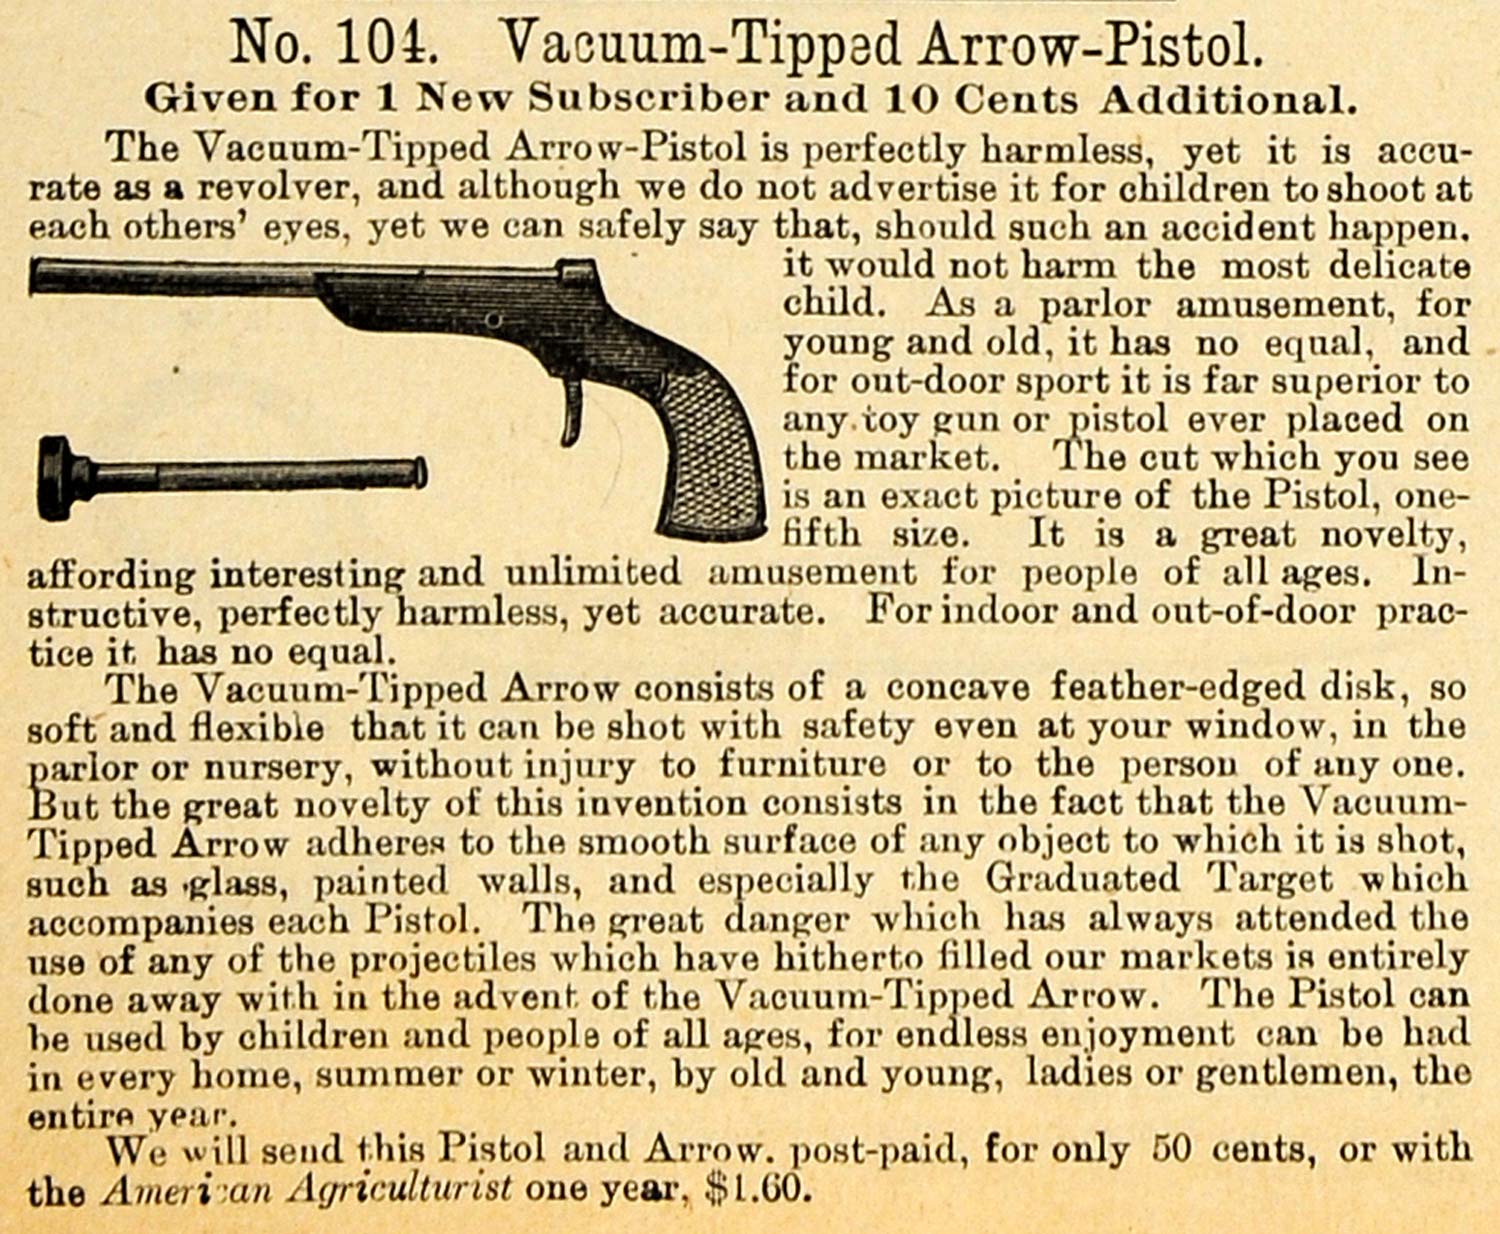 1890 Ad No. 104 Vacuum-Tipped Arrow-Pistol American Agriculturist Gift AAG1